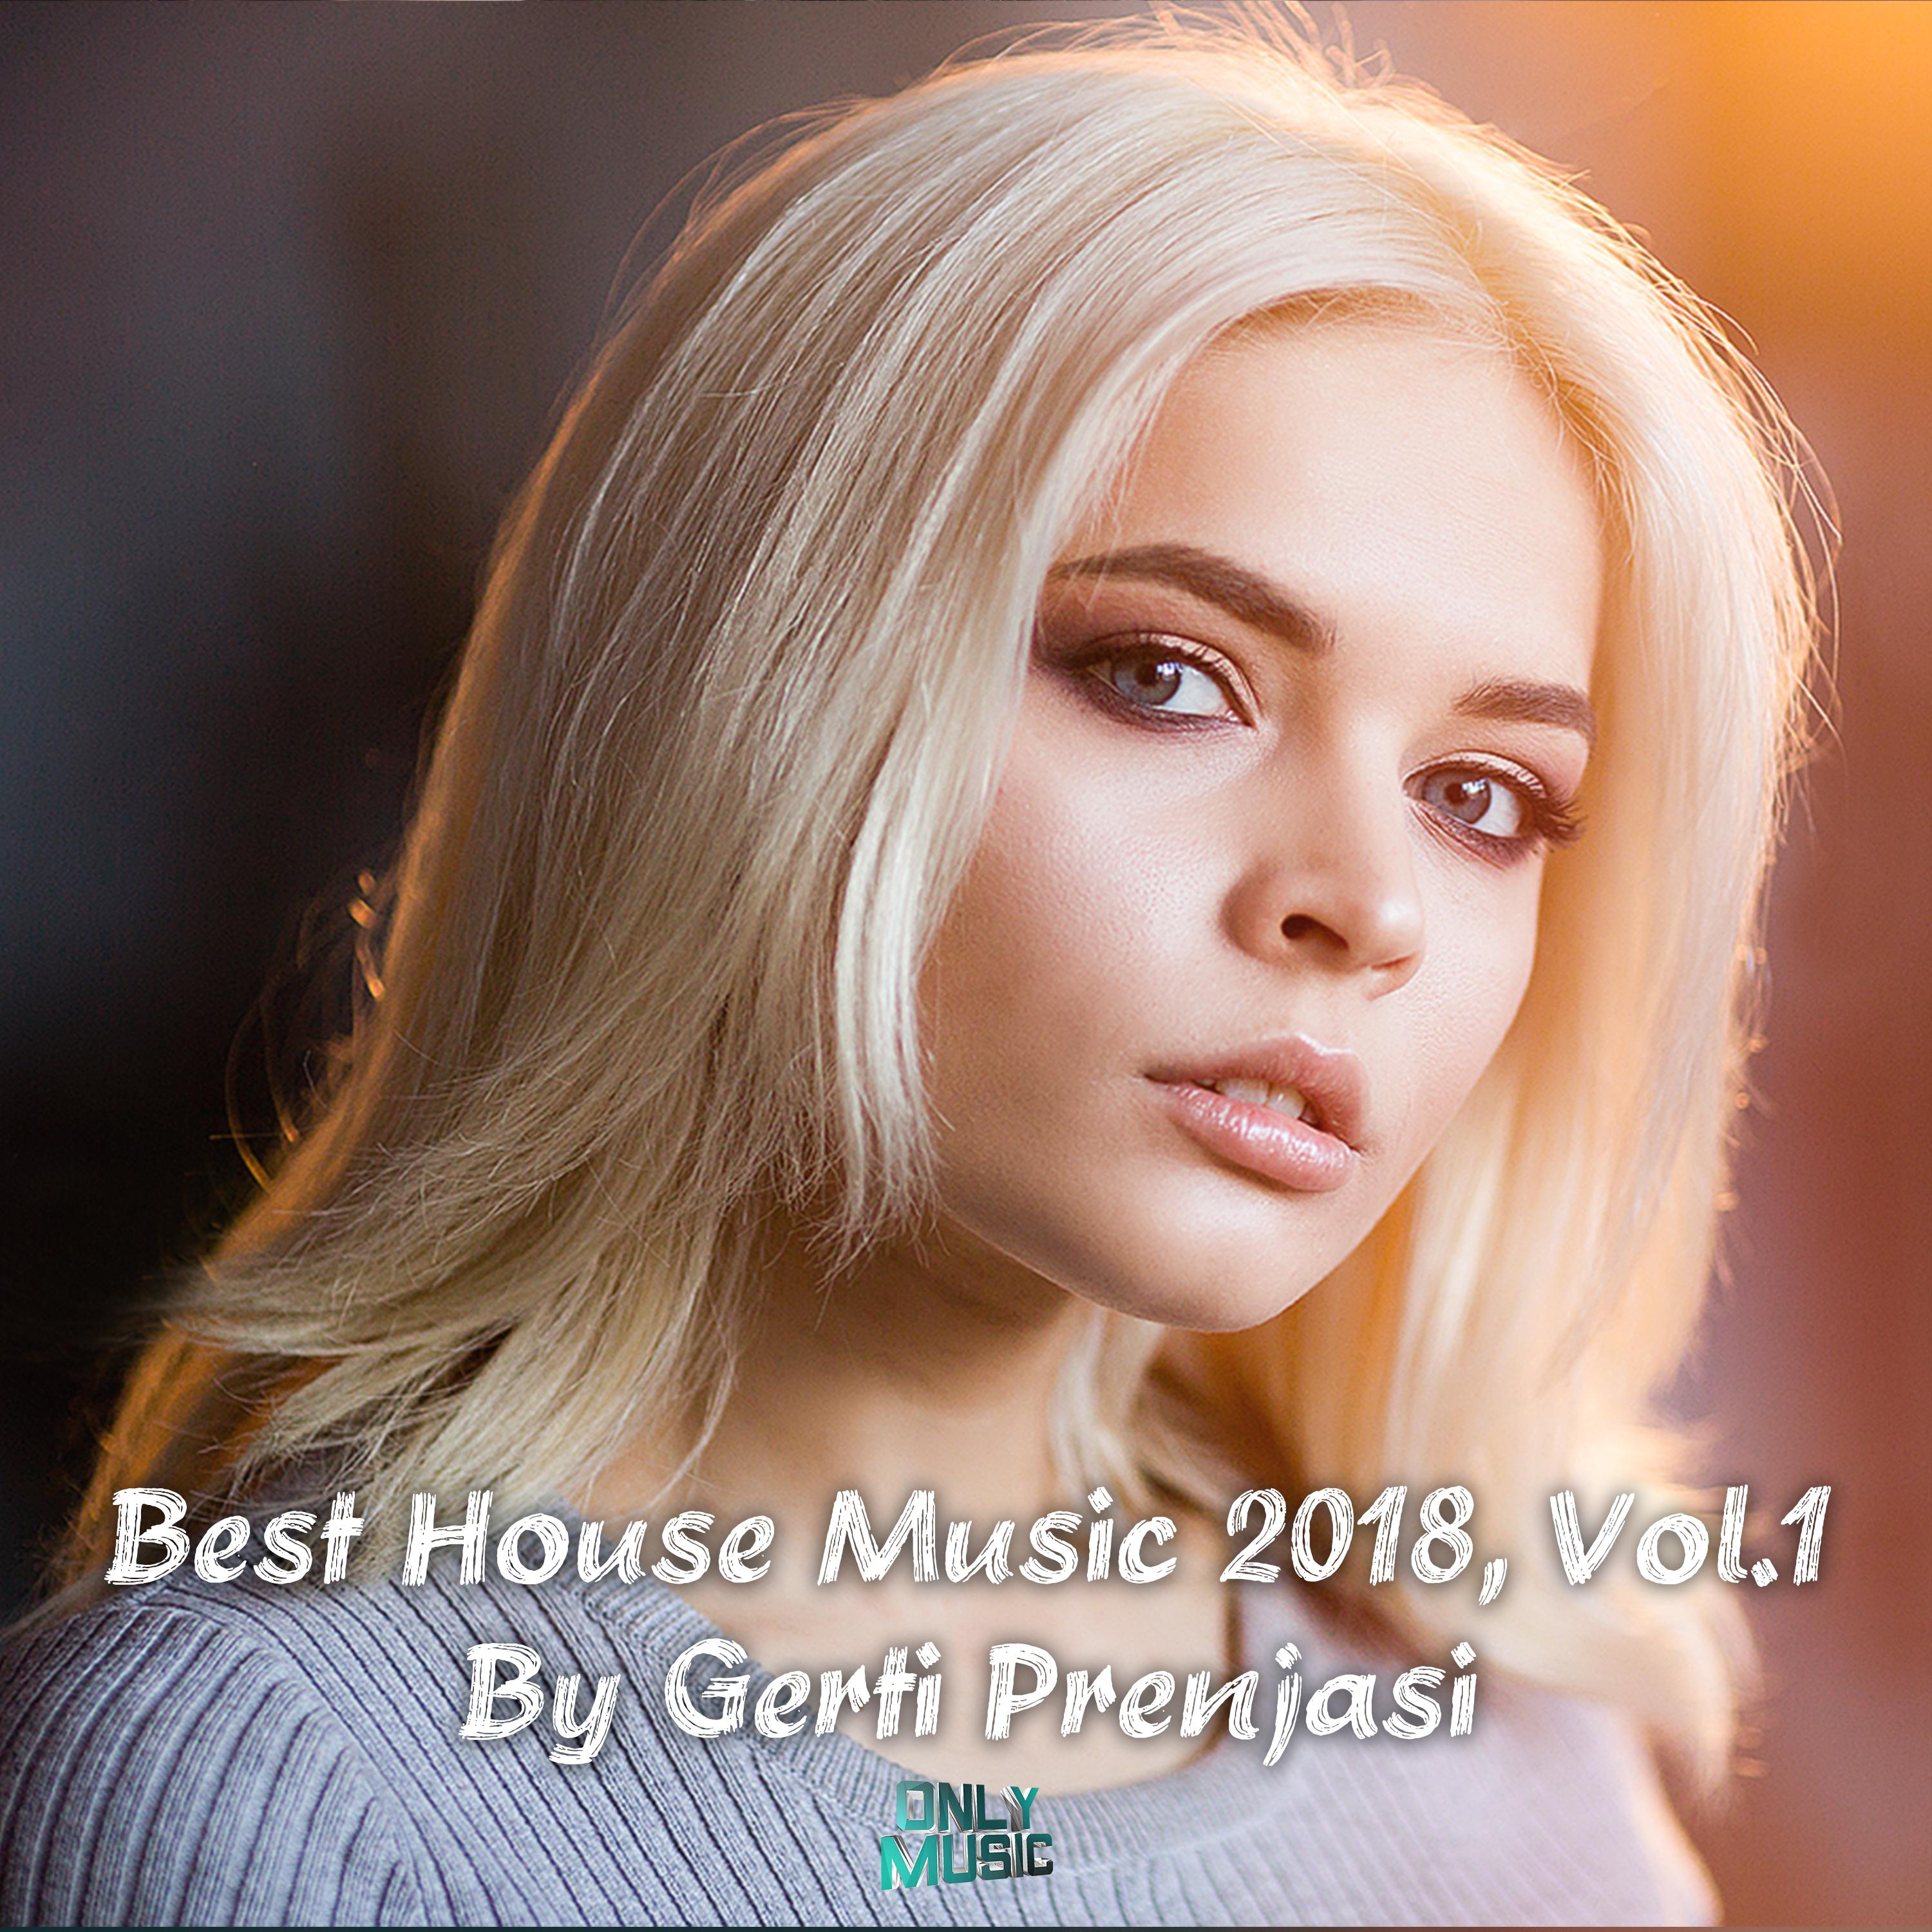 Best House Music 2018, Vol. 1 (Mixed by Gerti Prenjasi) [Continuous DJ Mix]